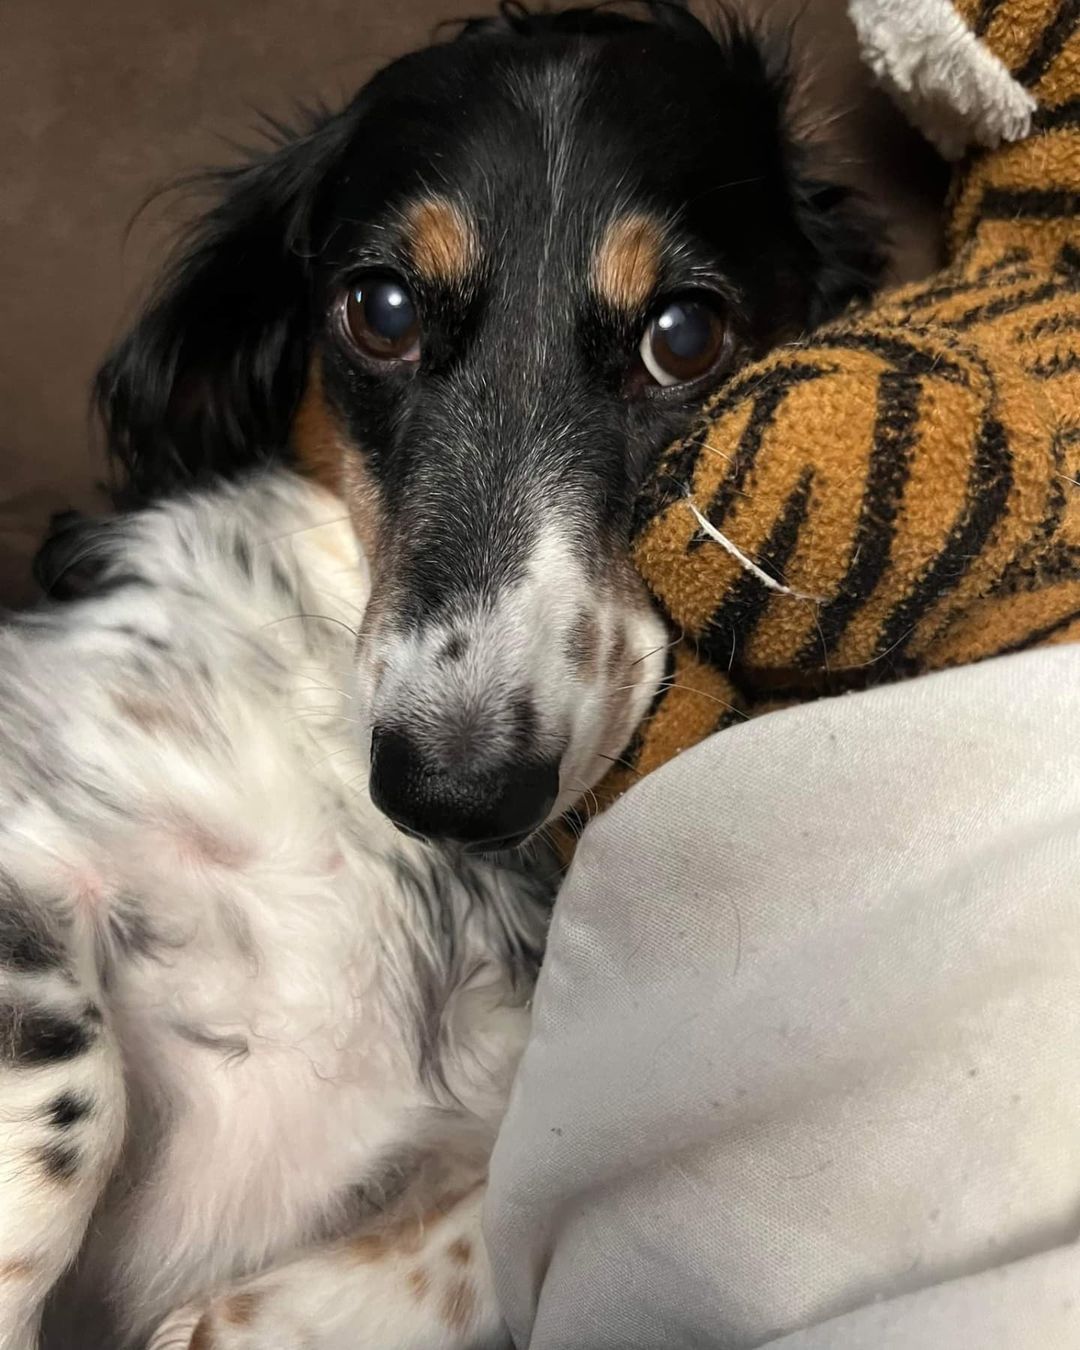 Happy Friday from Remington 🖤 
<a target='_blank' href='https://www.instagram.com/explore/tags/piebalddachshund/'>#piebalddachshund</a> <a target='_blank' href='https://www.instagram.com/explore/tags/longhairdachshund/'>#longhairdachshund</a> <a target='_blank' href='https://www.instagram.com/explore/tags/dachshundsofinstagram/'>#dachshundsofinstagram</a> <a target='_blank' href='https://www.instagram.com/explore/tags/doxiesofinstagram/'>#doxiesofinstagram</a> <a target='_blank' href='https://www.instagram.com/explore/tags/rescueddogsofinstagram/'>#rescueddogsofinstagram</a> <a target='_blank' href='https://www.instagram.com/explore/tags/seattledogsofinstagram/'>#seattledogsofinstagram</a> <a target='_blank' href='https://www.instagram.com/explore/tags/dachshund/'>#dachshund</a> <a target='_blank' href='https://www.instagram.com/explore/tags/doxielove/'>#doxielove</a> <a target='_blank' href='https://www.instagram.com/explore/tags/doxies/'>#doxies</a> <a target='_blank' href='https://www.instagram.com/explore/tags/foster/'>#foster</a> <a target='_blank' href='https://www.instagram.com/explore/tags/adoptdontshop/'>#adoptdontshop</a> <a target='_blank' href='https://www.instagram.com/explore/tags/adopt/'>#adopt</a> <a target='_blank' href='https://www.instagram.com/explore/tags/dogsofinstagram/'>#dogsofinstagram</a> <a target='_blank' href='https://www.instagram.com/explore/tags/weenie/'>#weenie</a> <a target='_blank' href='https://www.instagram.com/explore/tags/eyes/'>#eyes</a> <a target='_blank' href='https://www.instagram.com/explore/tags/onepawatatime/'>#onepawatatime</a>